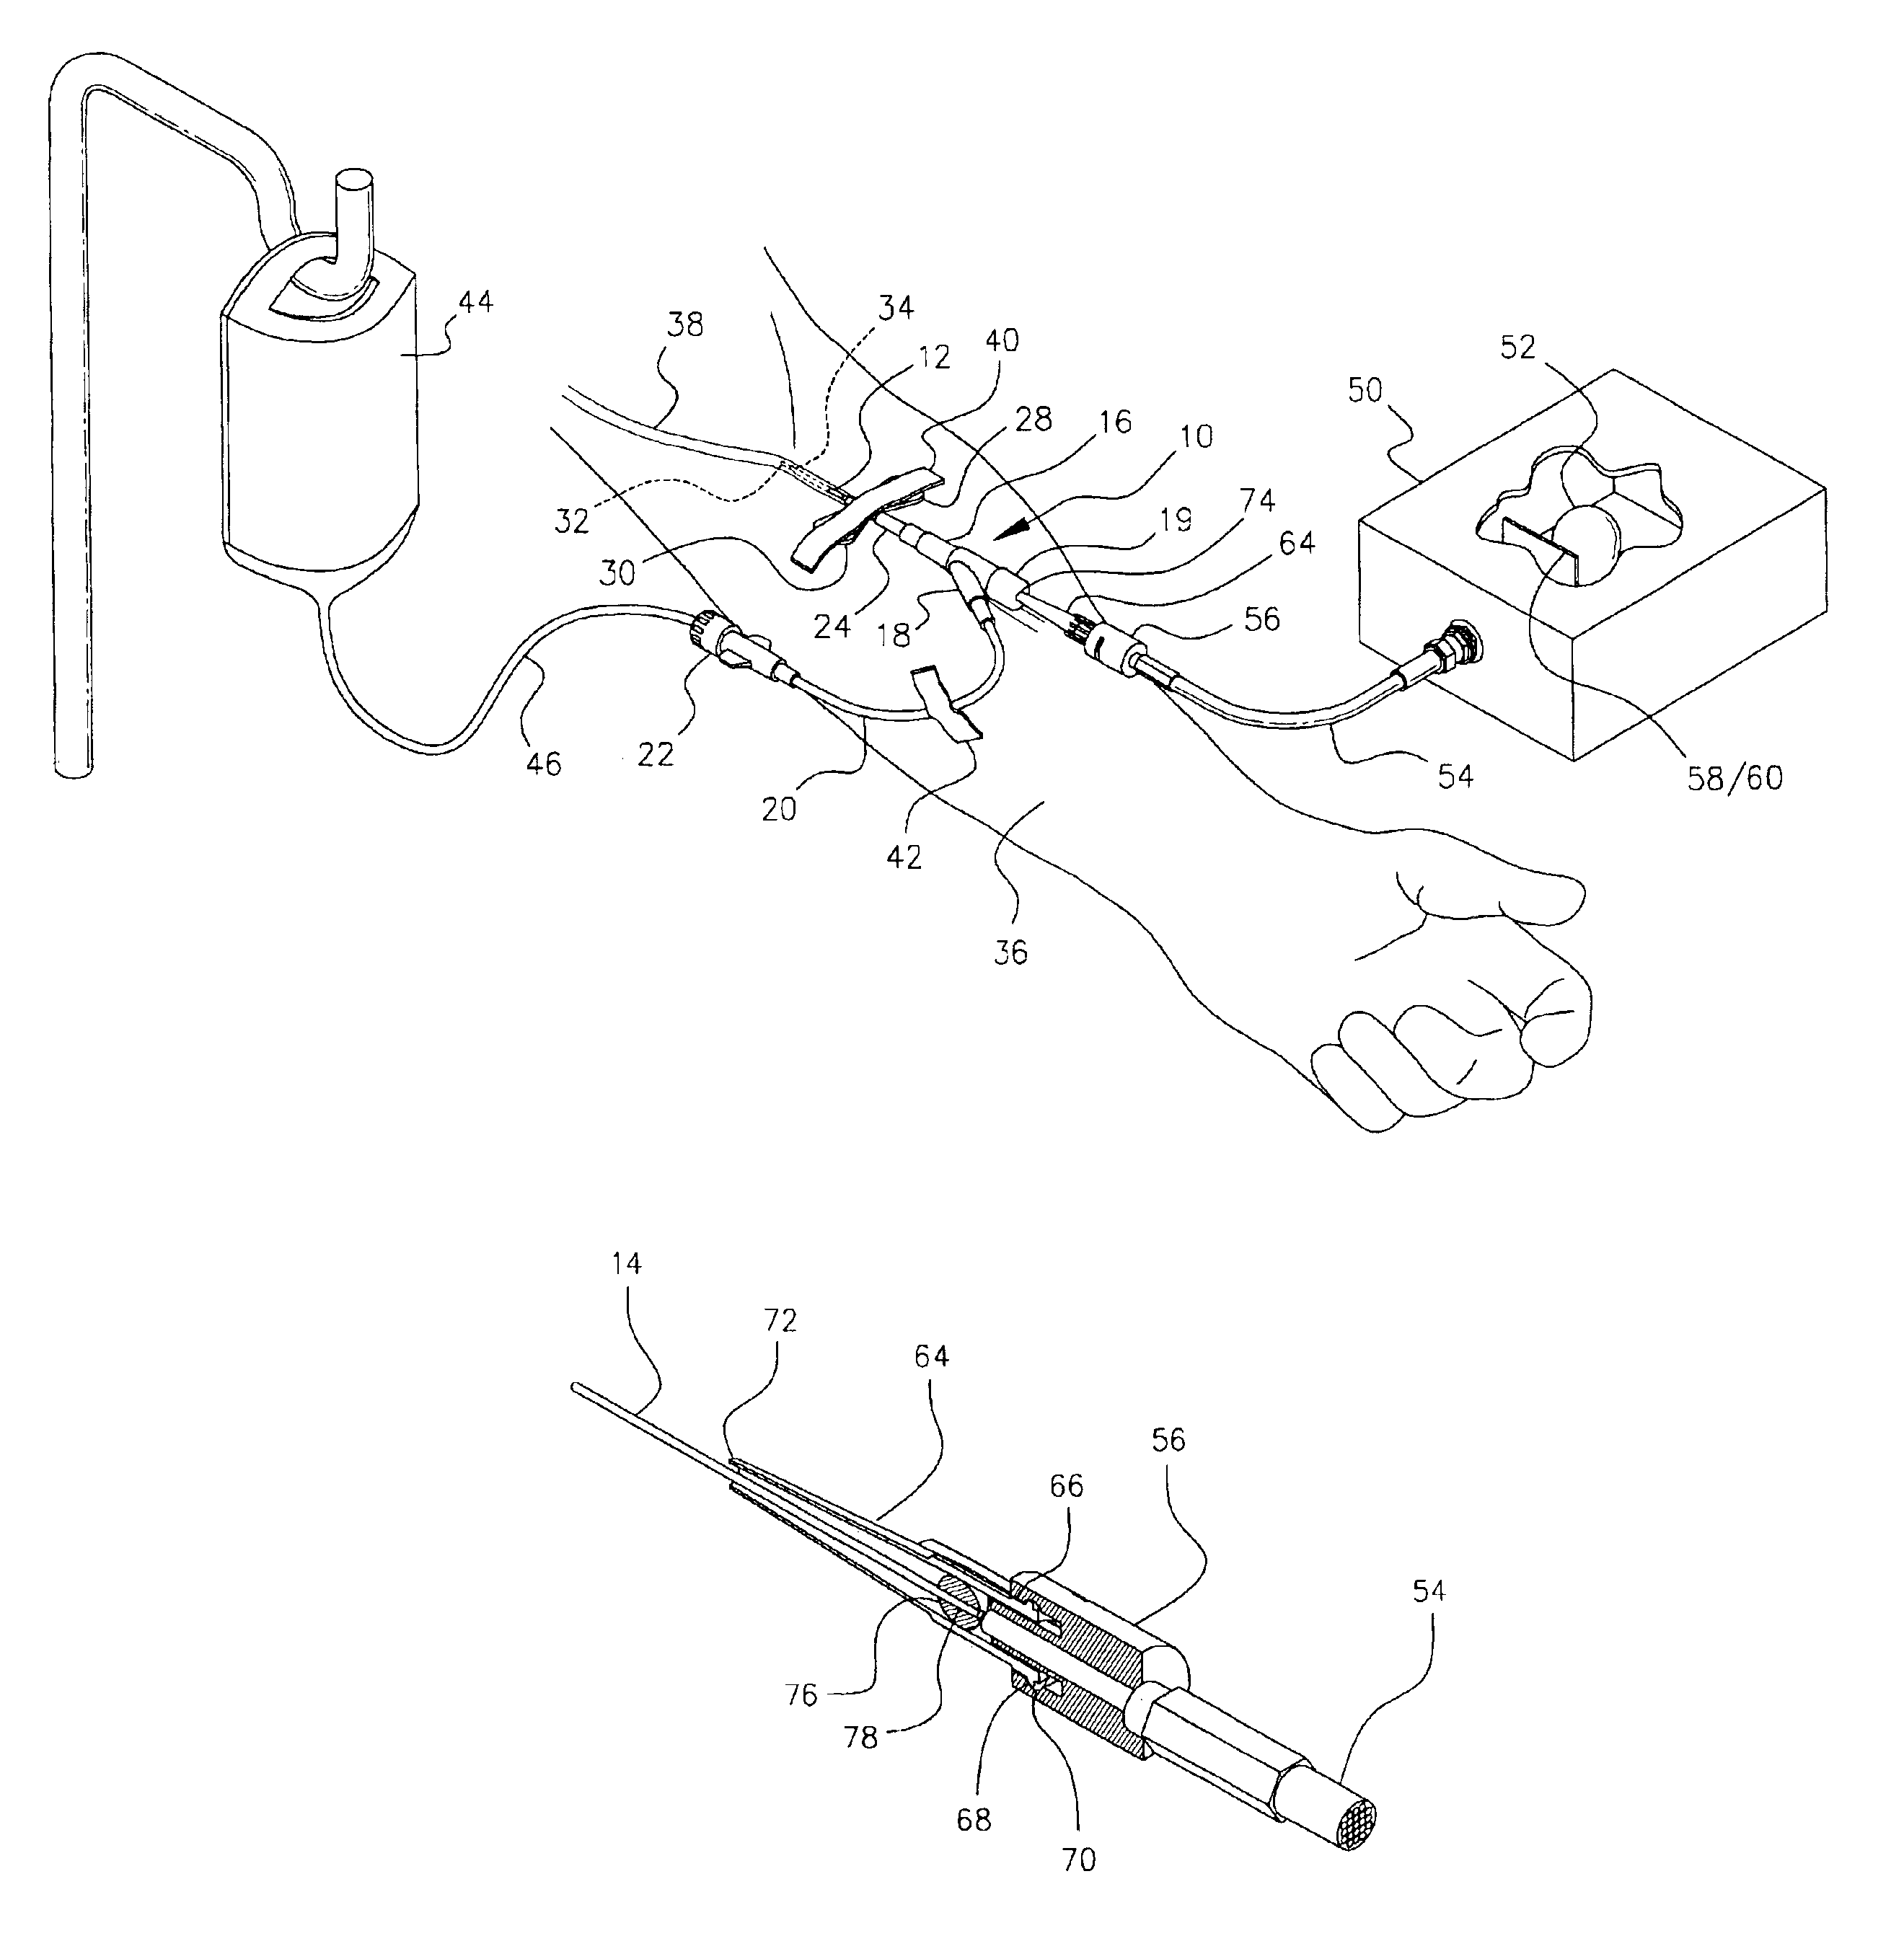 Apparatus for conveying a light source to an intravenous needle to kill blood pathogens